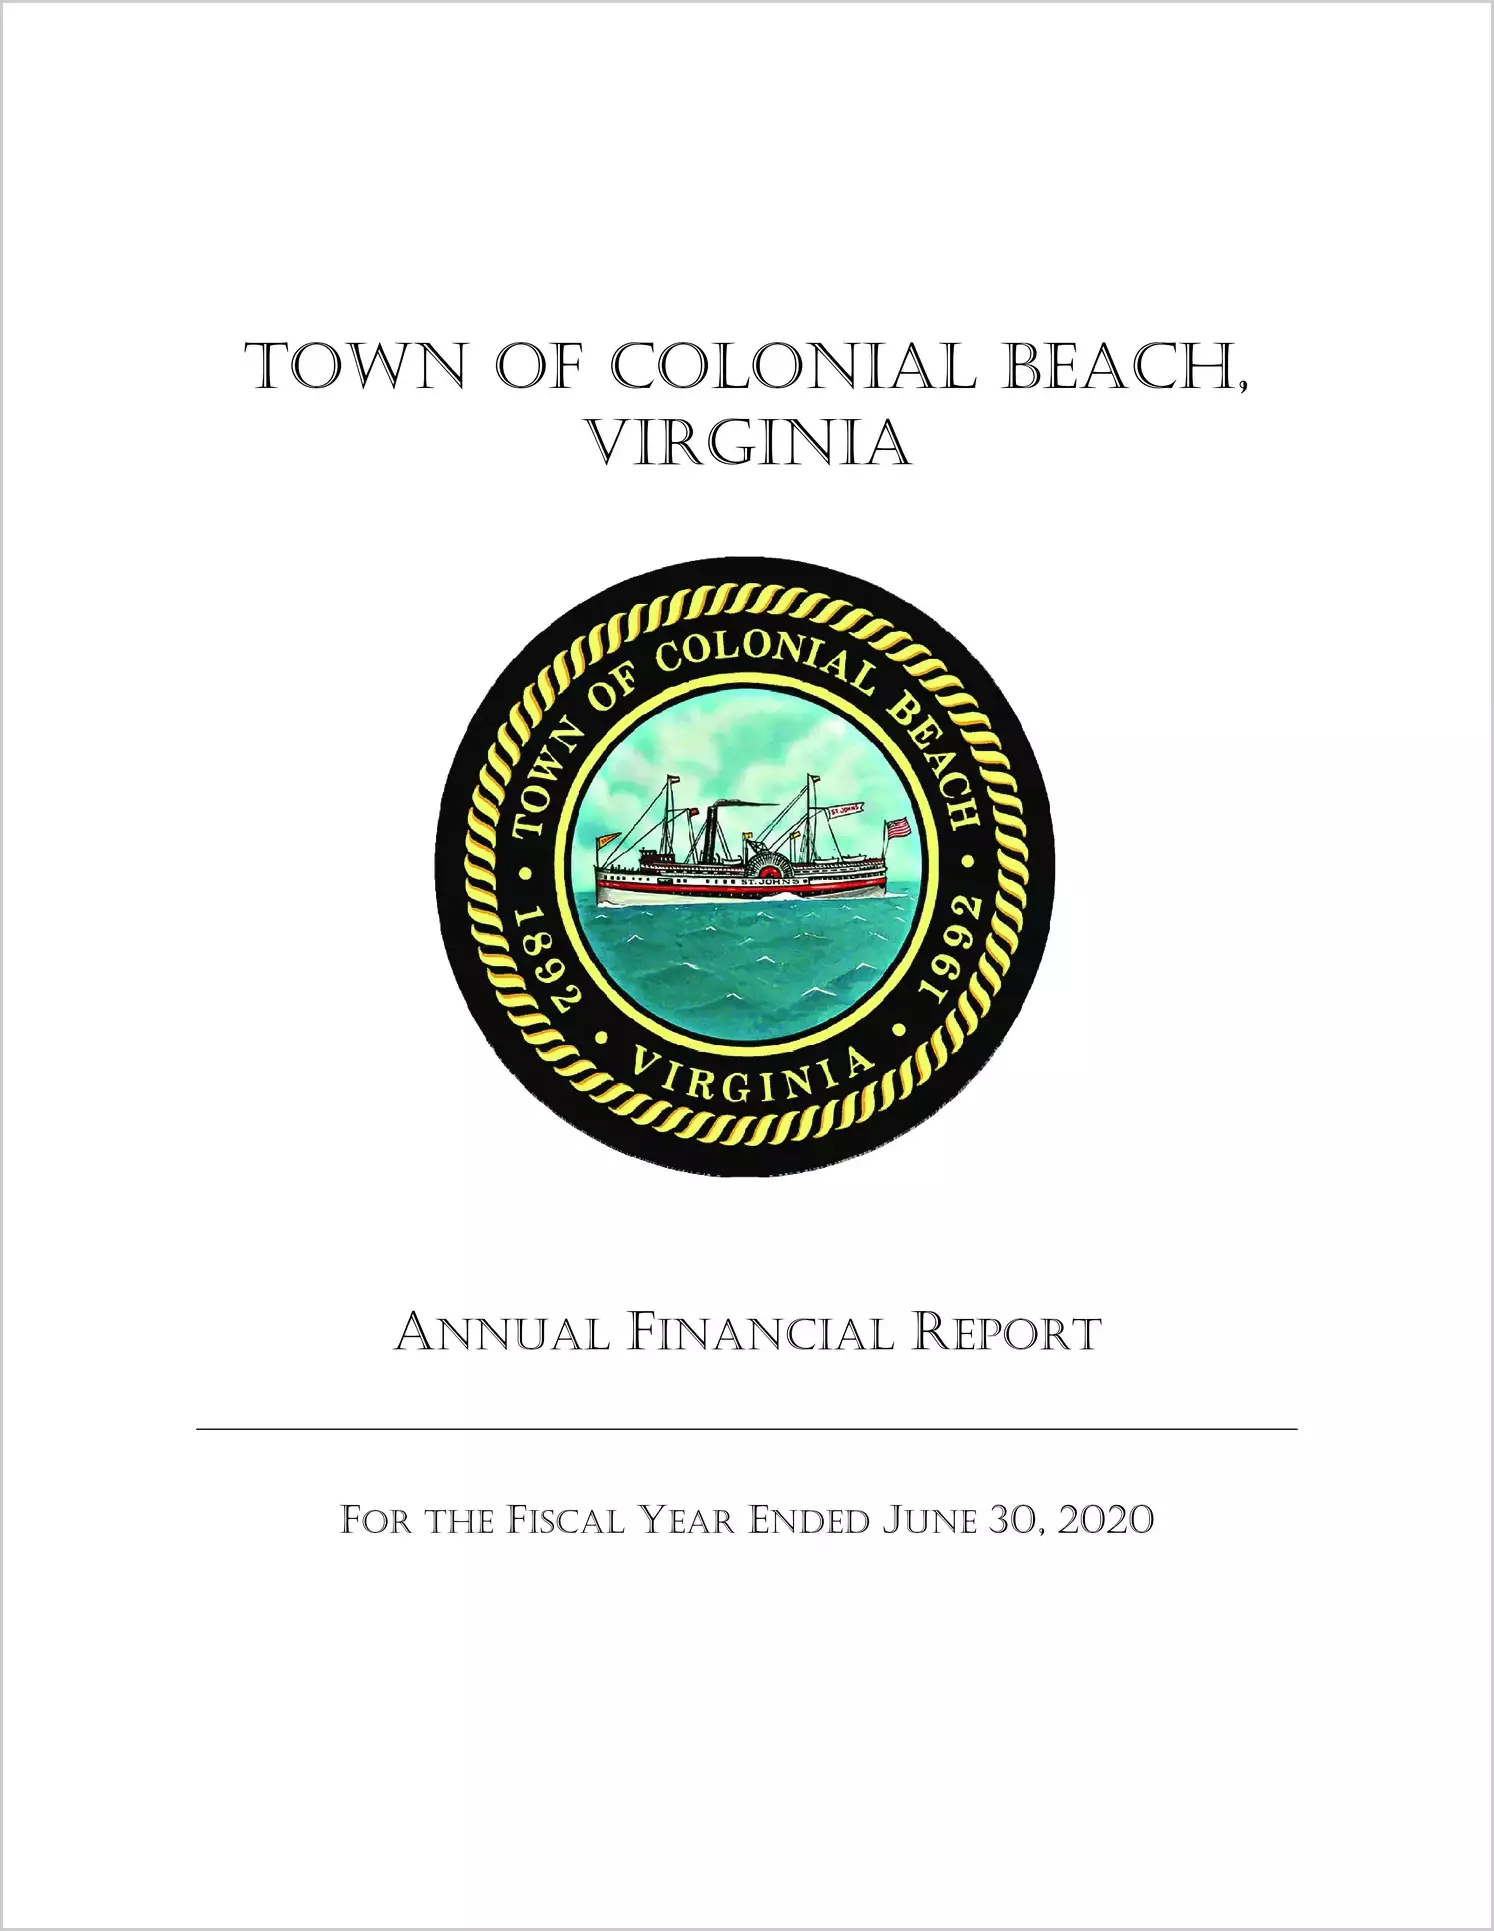 2020 Annual Financial Report for Town of Colonial Beach